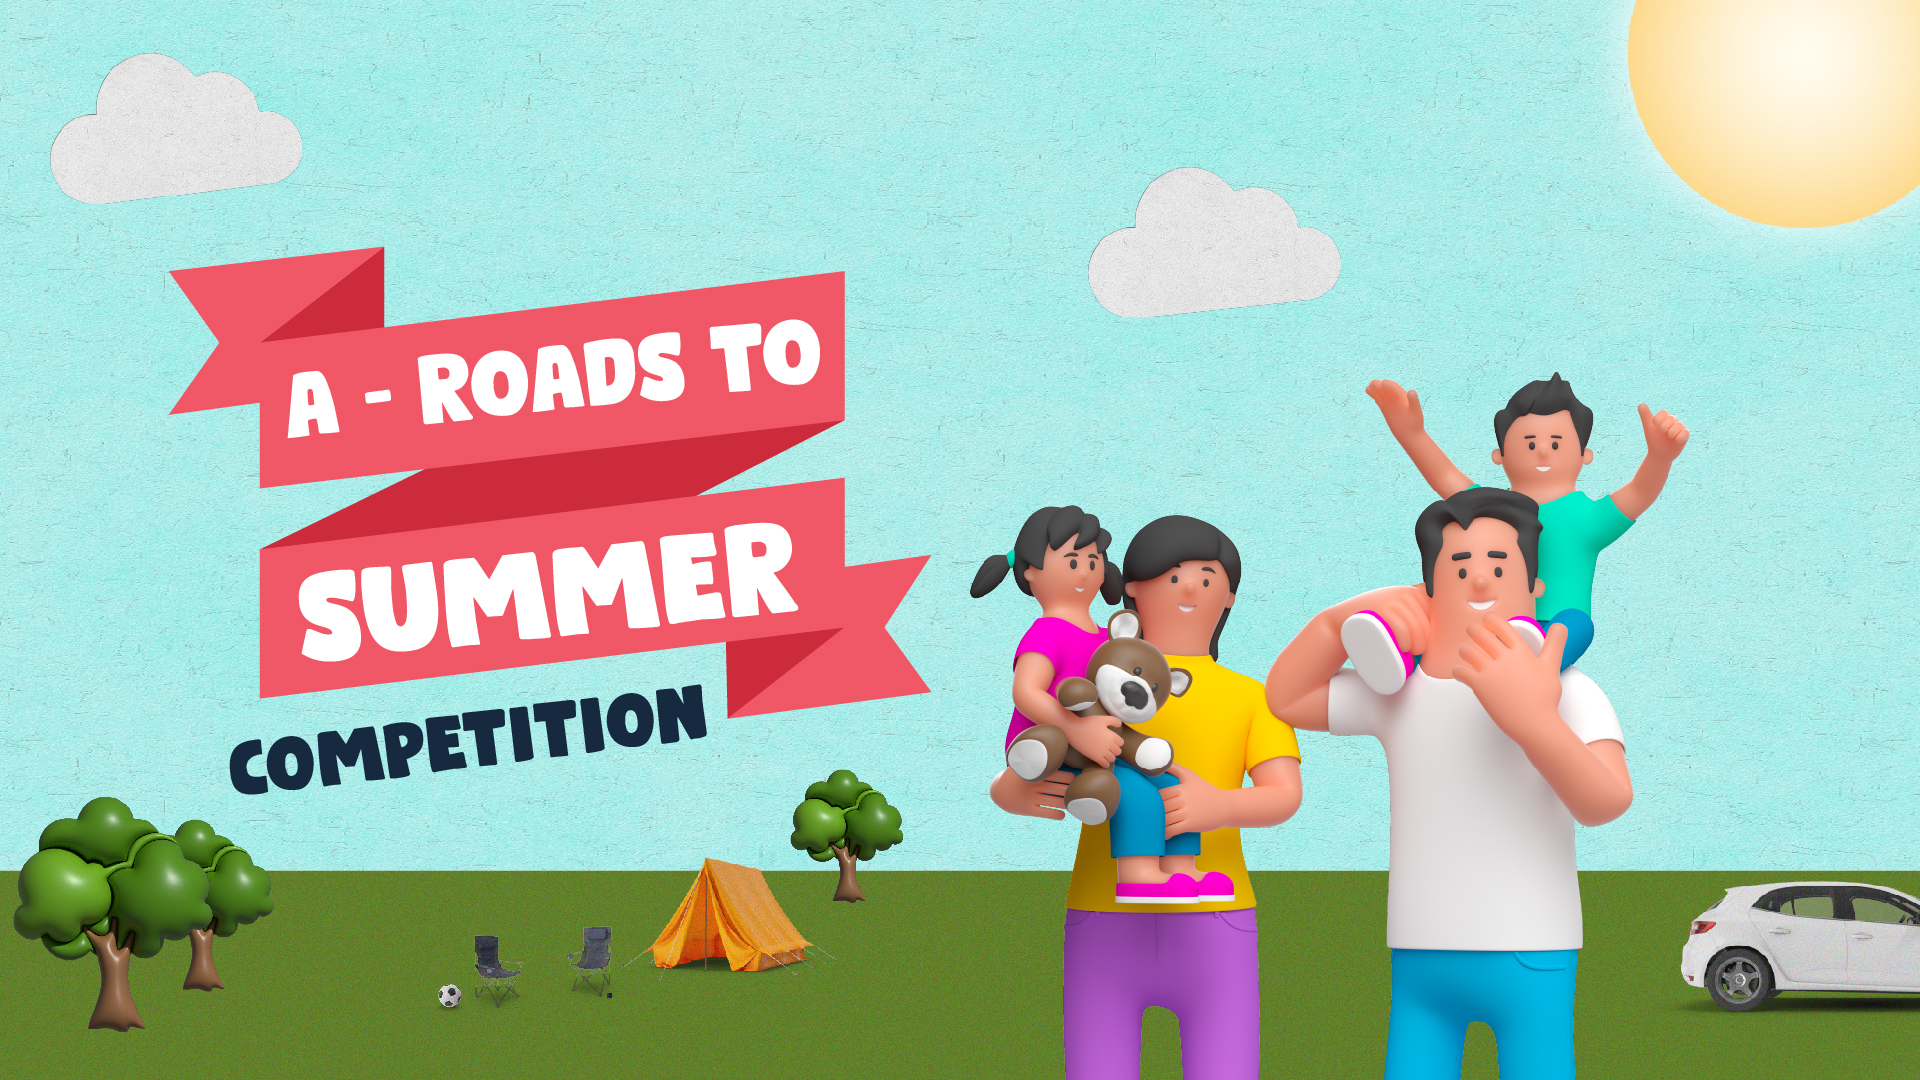 A roads to summer competition